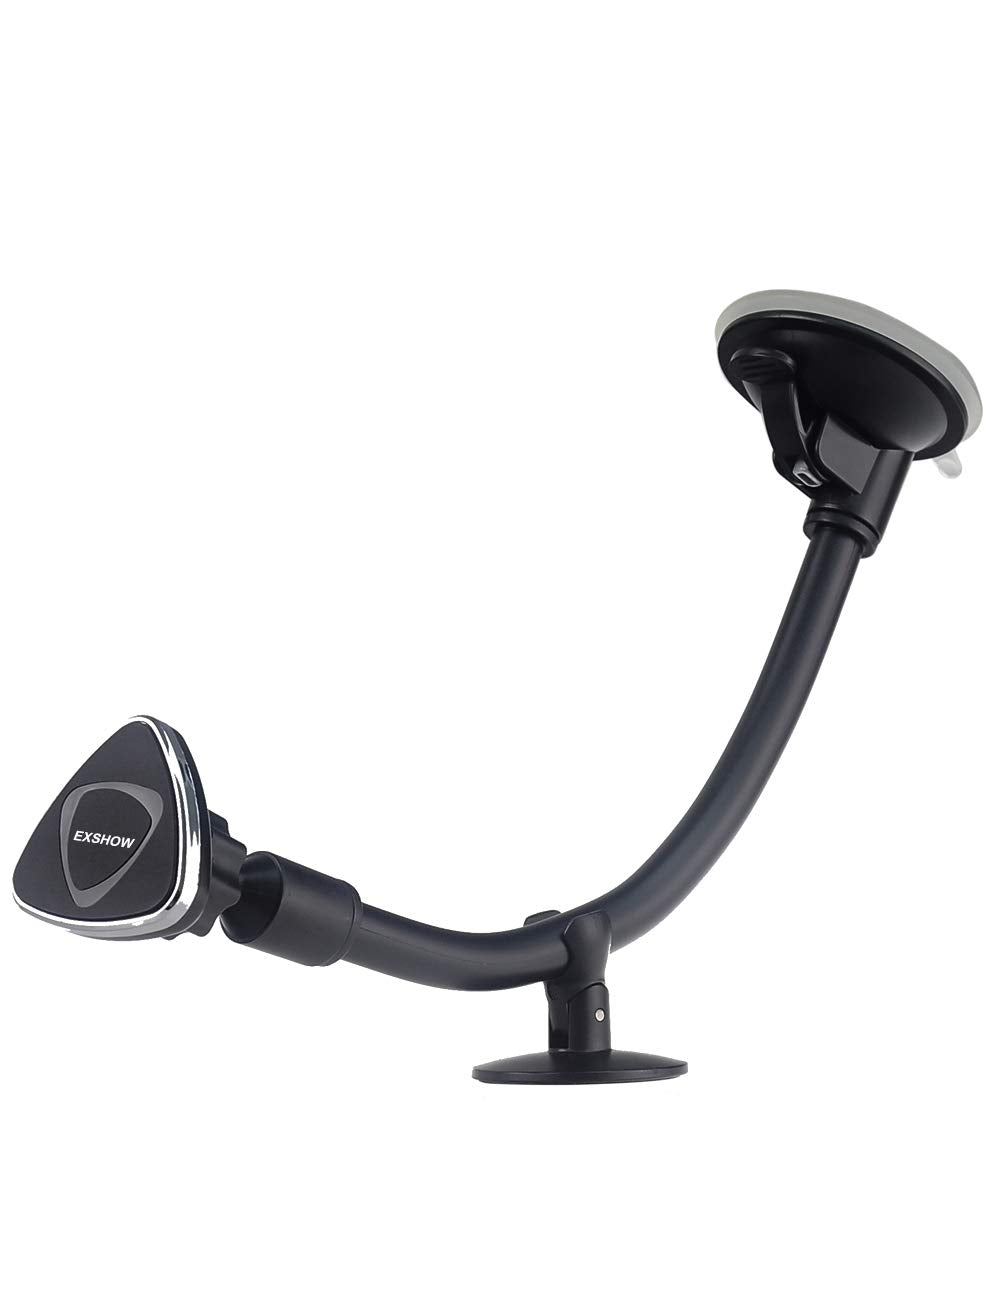  [AUSTRALIA] - EXSHOW Car Phone Holder, Magnetic Windscreen Car Mount, Flexible Long Arm Windshield Suction Phone Cradle with Dashboard Base for iPhone xr xs x 8 Plus Huawei Mate 10 9 Honor Samsung S10 S9+ Note etc